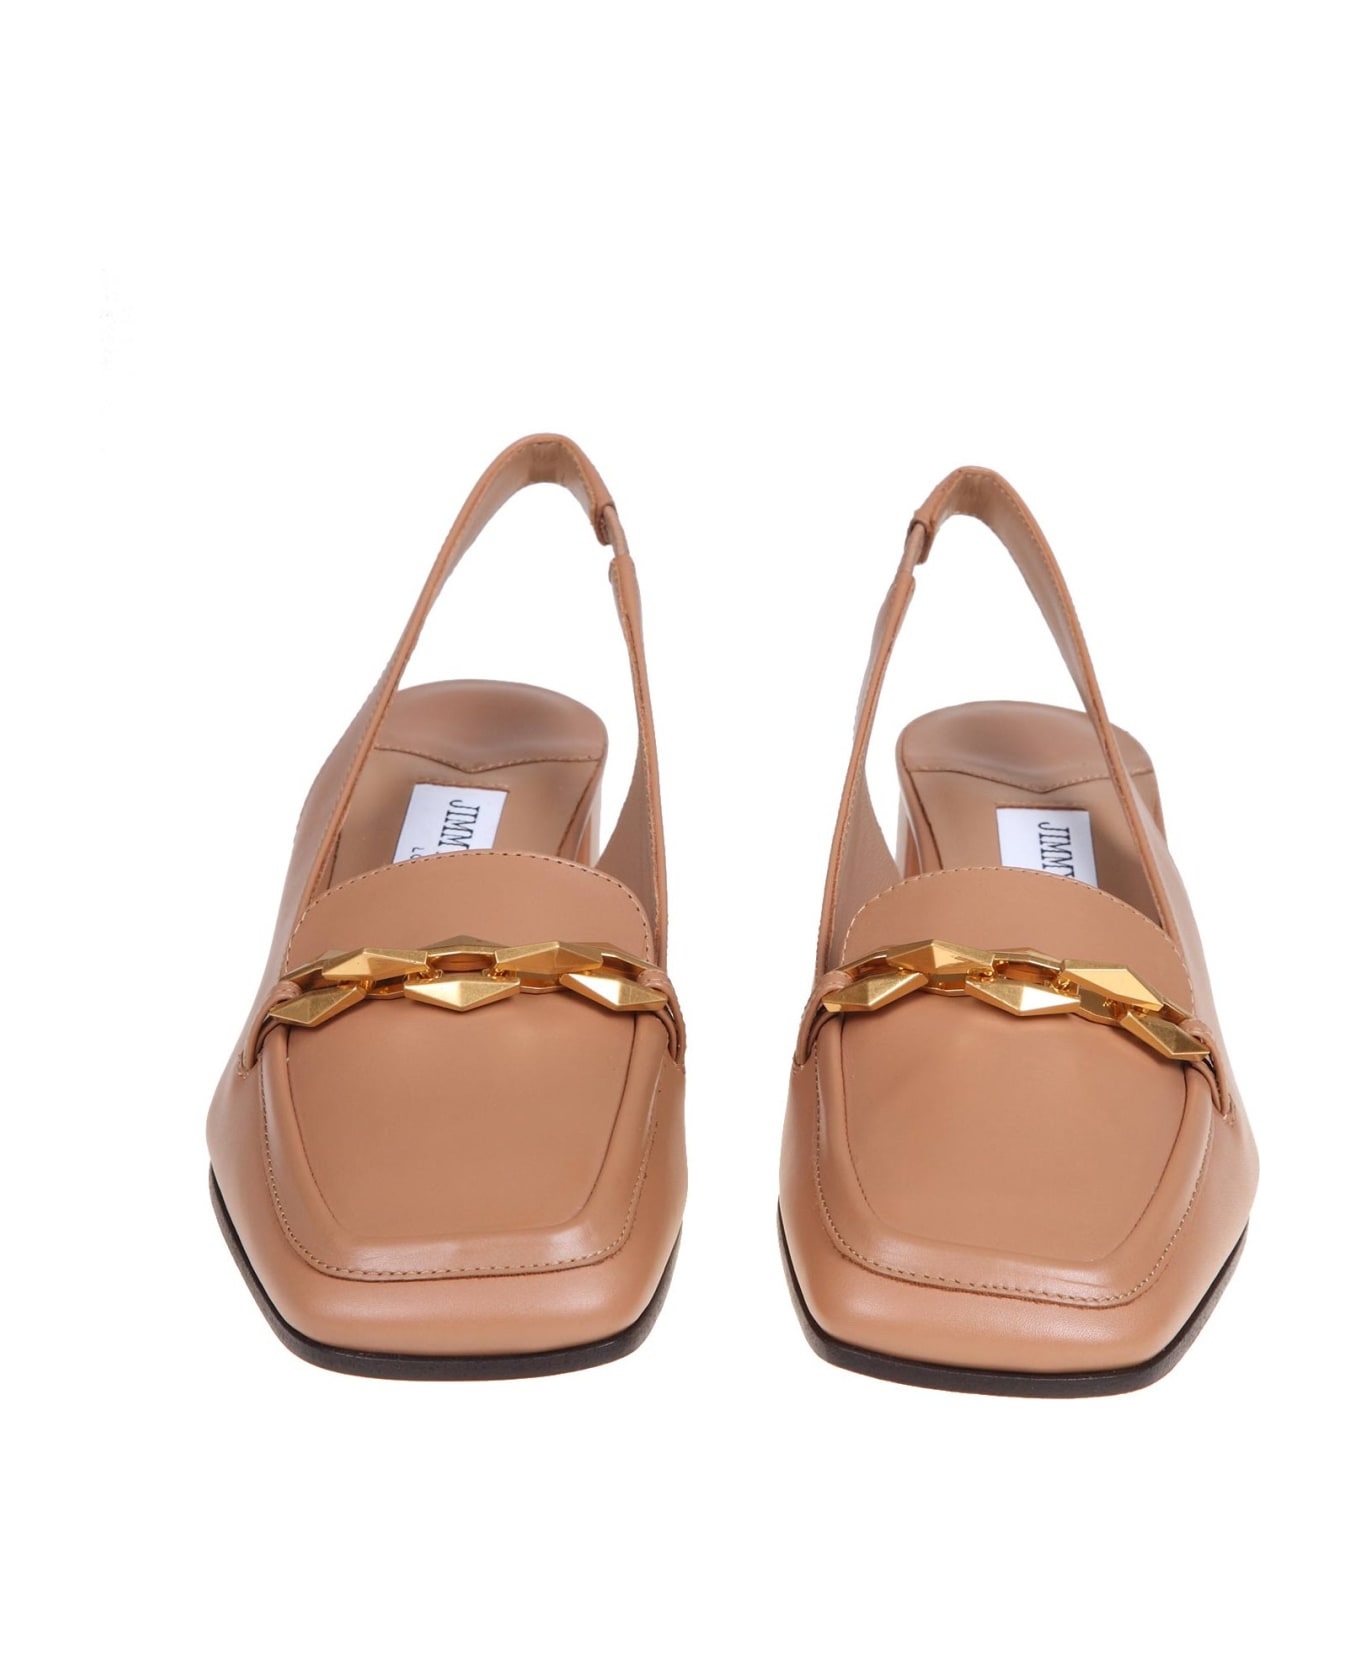 Jimmy Choo Pumps Slingback In Biscuit Color Leather - Biscuit